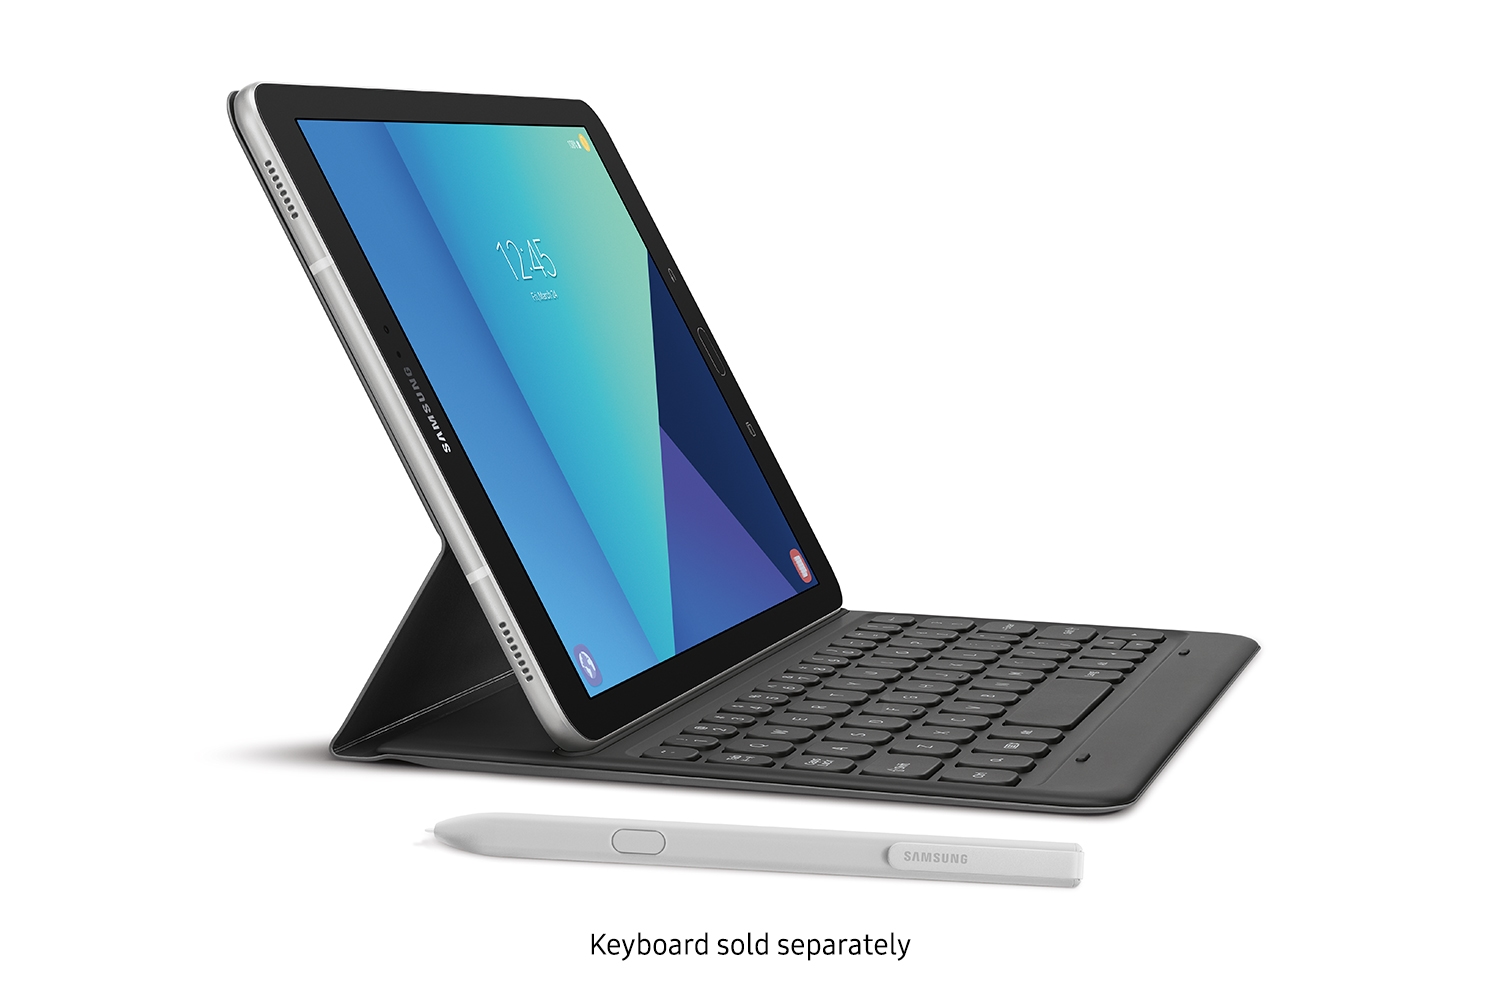 Thumbnail image of Galaxy Tab S3 9.7” (S Pen included), Silver